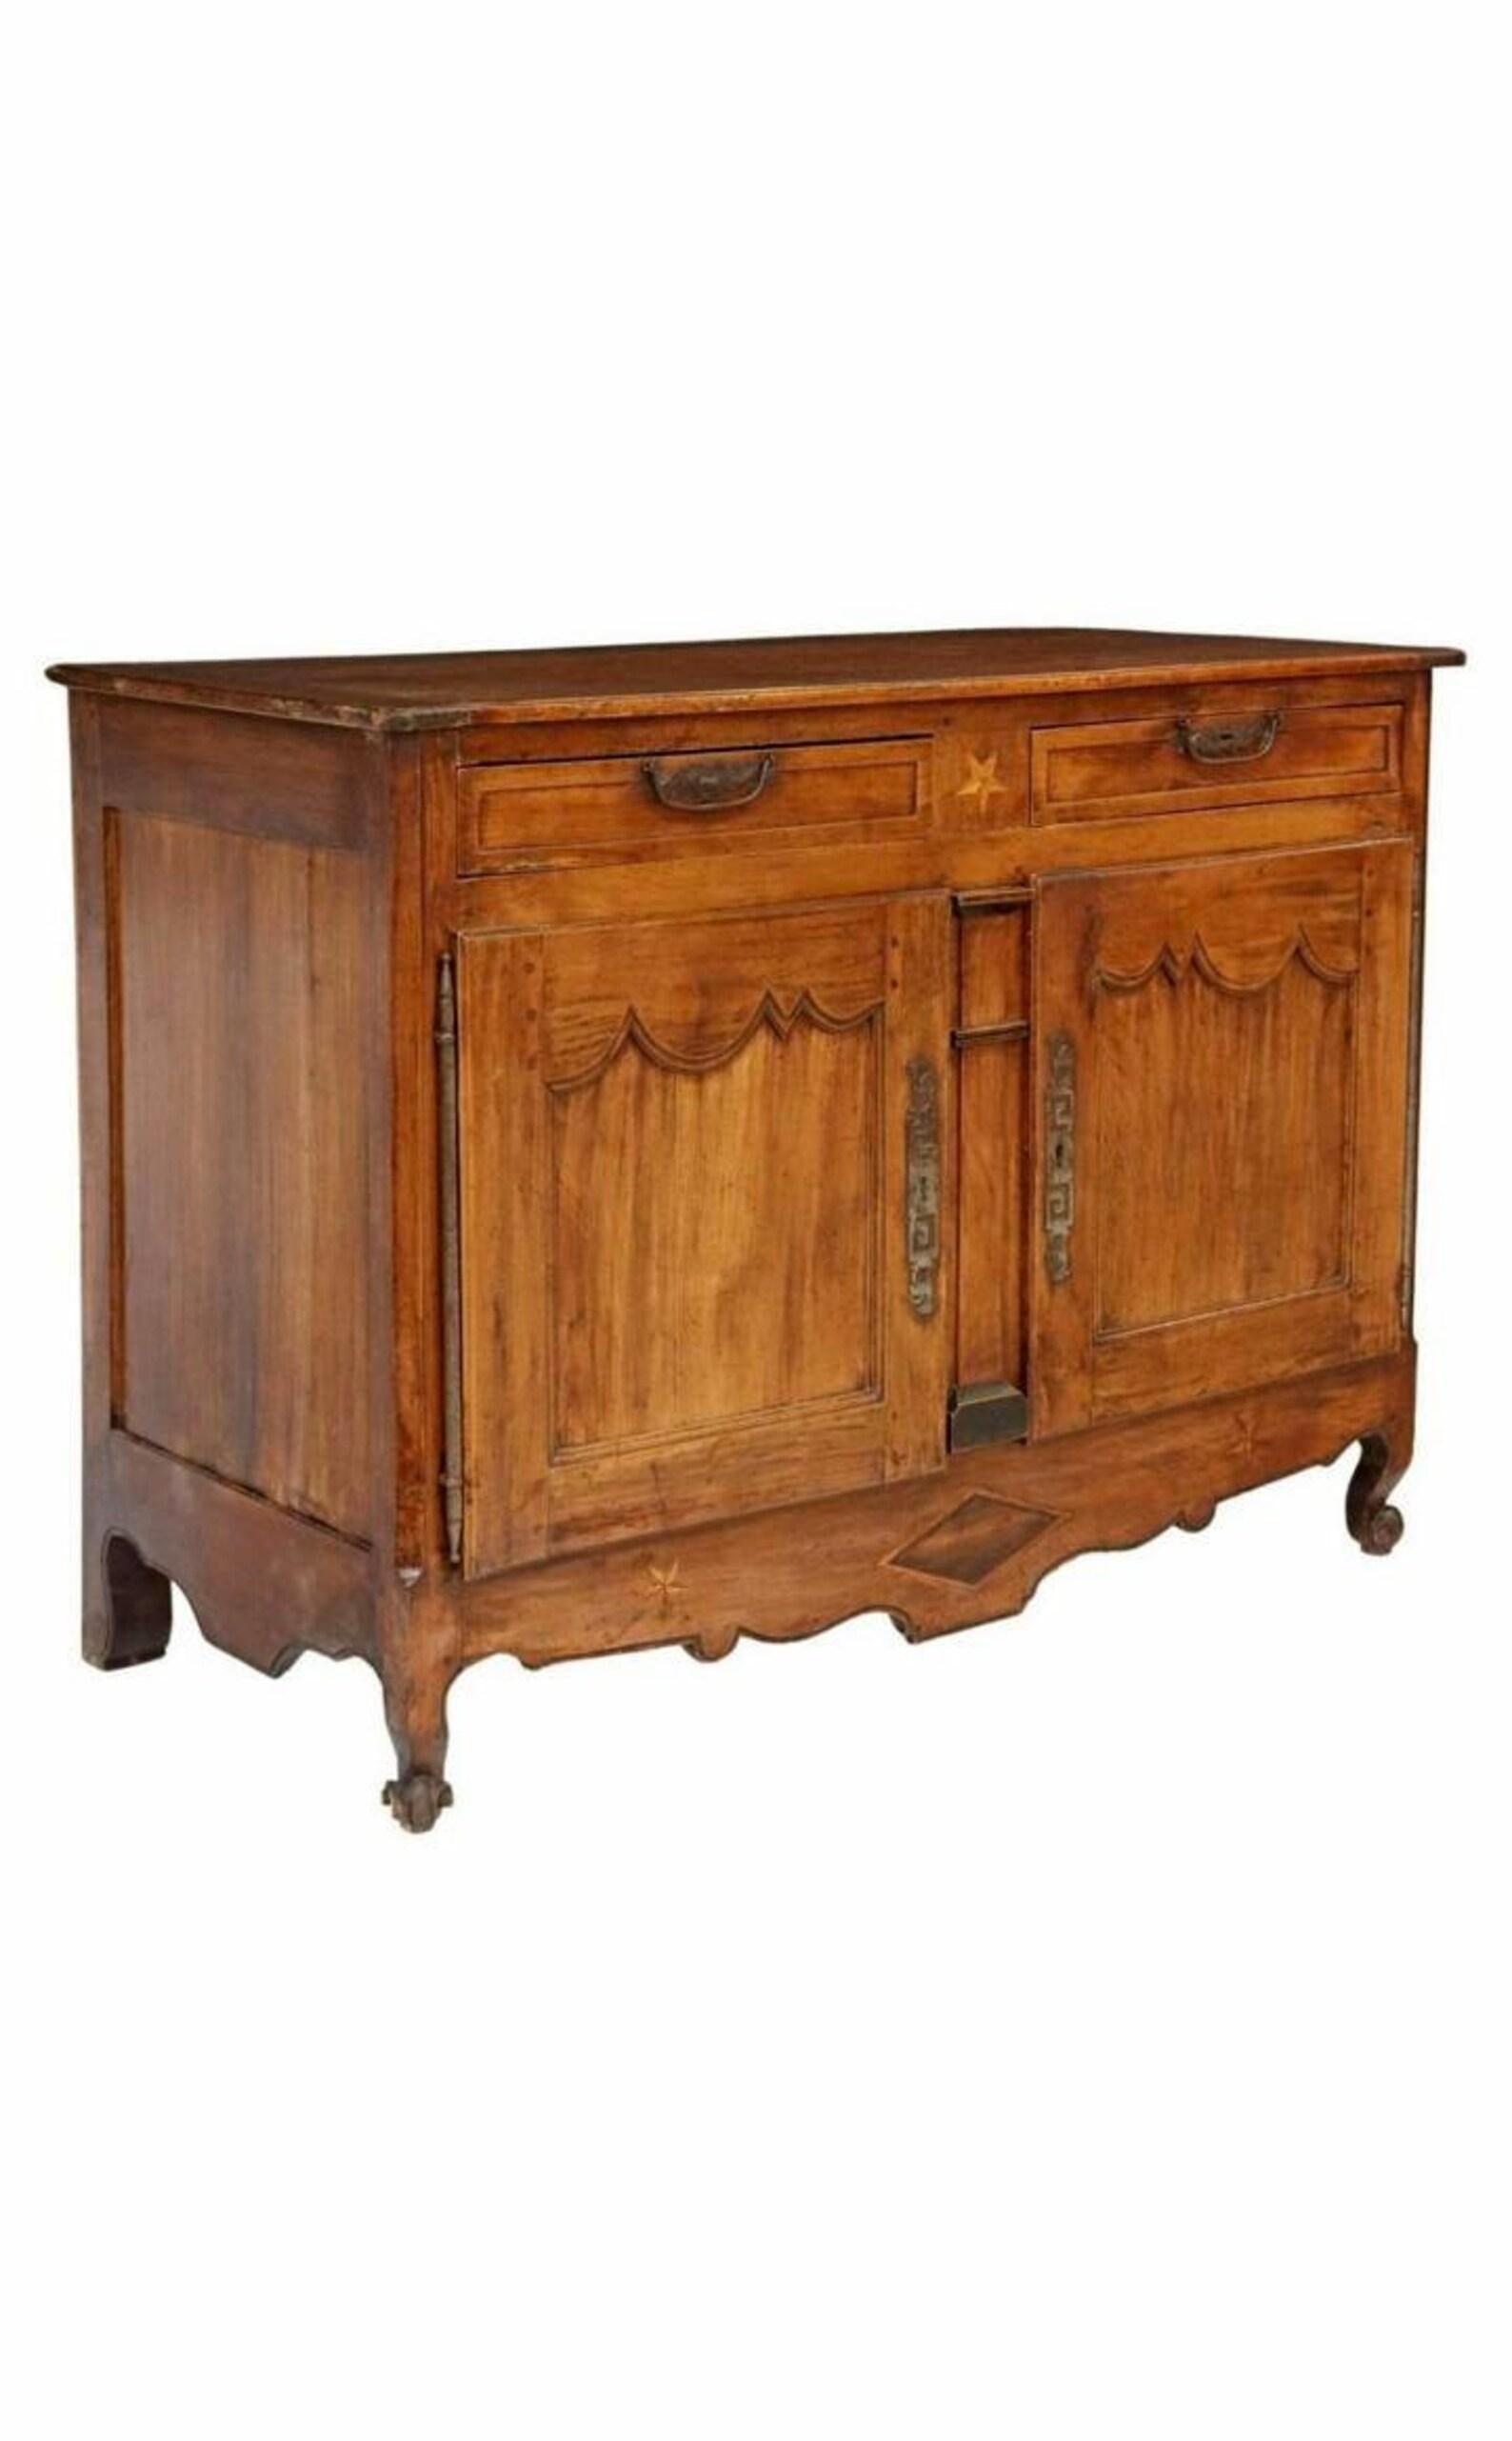 A country French Provincial Louis XV style antique, circa 1790-1820, star inlaid walnut enfilade with beautifully aged warm rustic patina.

Hand-crafted in France over 200 years ago, featuring the original plank top with breadboard batten ends and